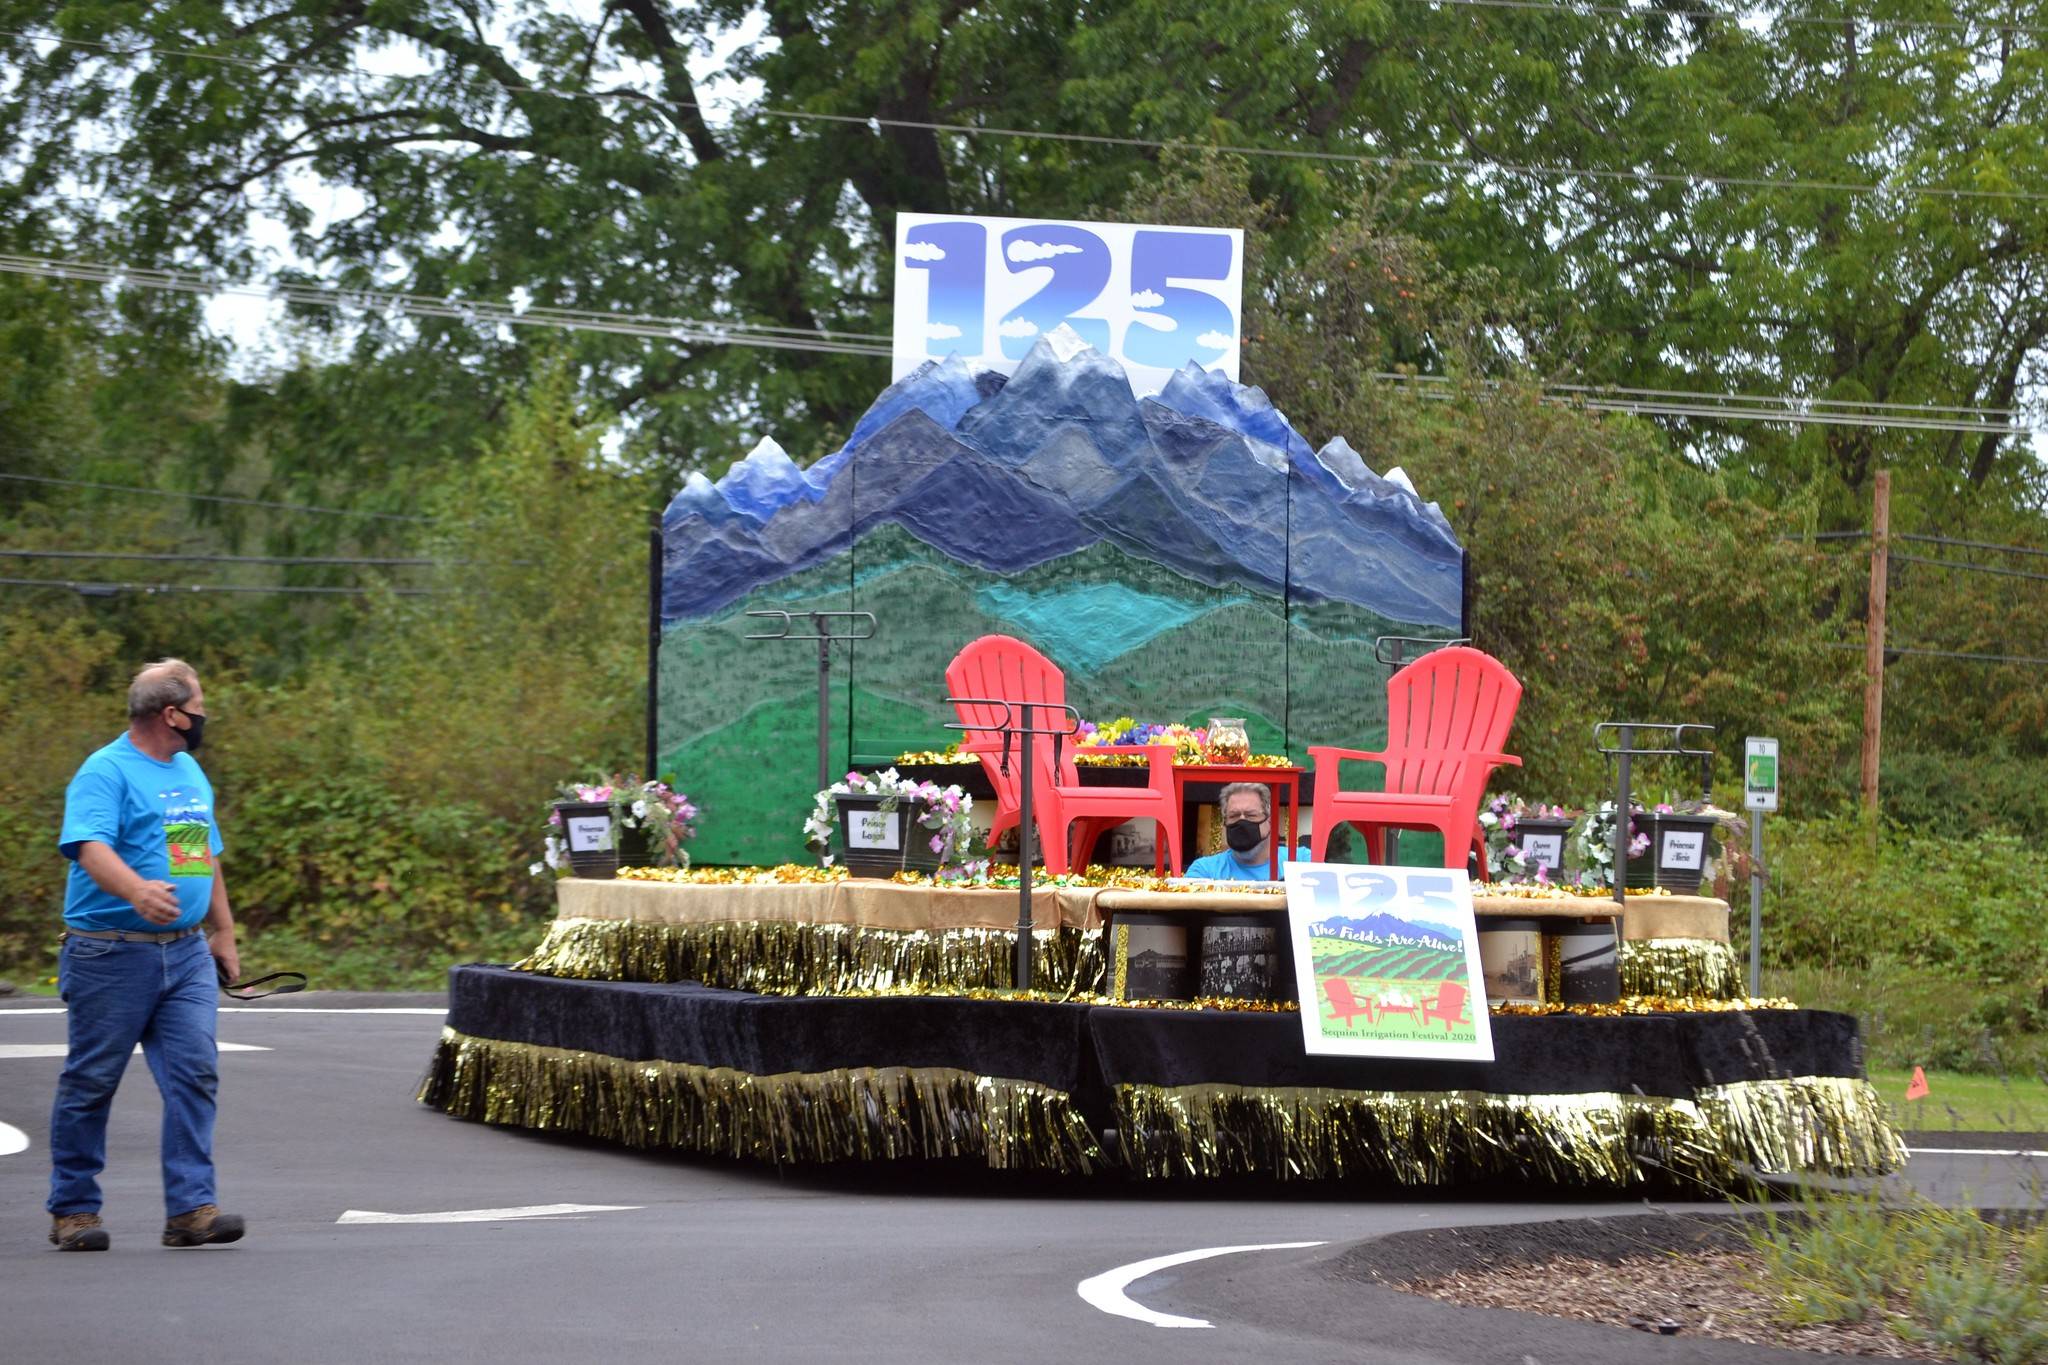 Locals can view the 2021 Sequim Irrigation Festival royalty float reveal at 4:45 p.m. Saturday from the festival’s website, www.irrigationfestival.com. Last year’s float, pictured here, was used only for the 2020 Kickoff Dinner and Grand Parade/Procession due to the pandemic. (Matthew Nash/Olympic Peninsula News Group)